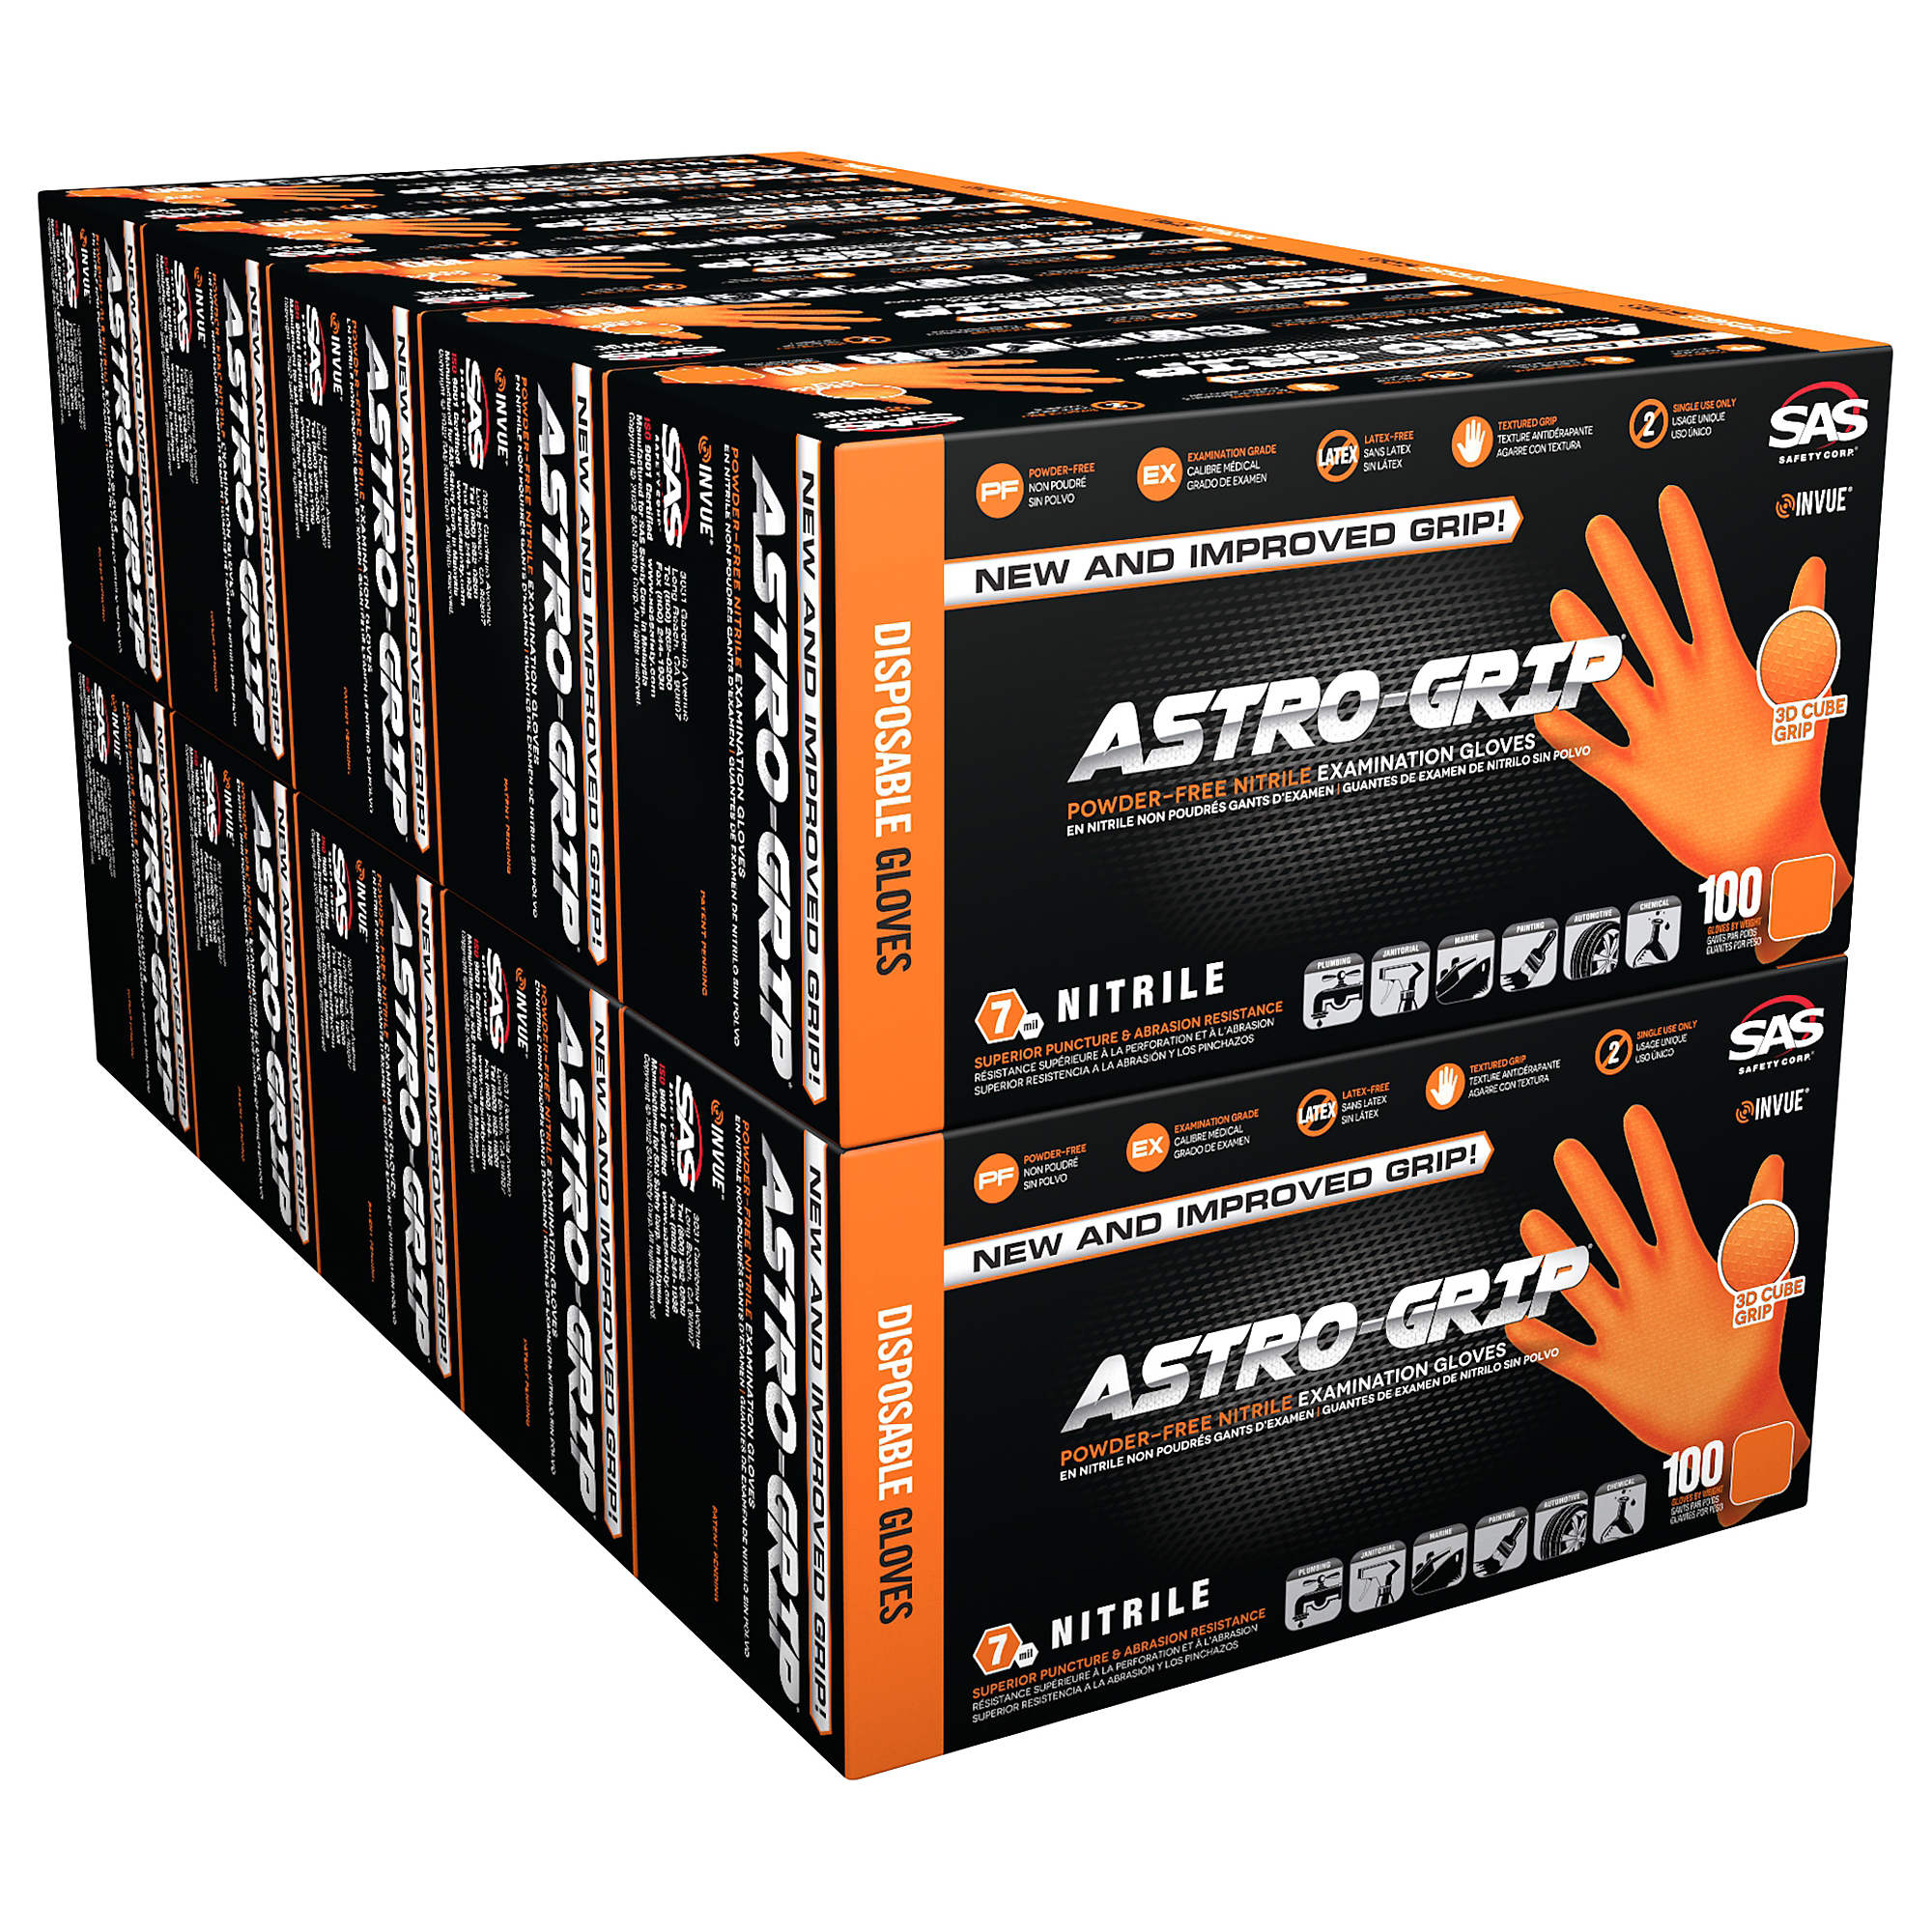 AstroGrip, 1000 Astro-Grip Disposable Gloves PF Nitrile 7mil, Size XL, Color Orange, Included (qty.) 1000 Model 66474CASE